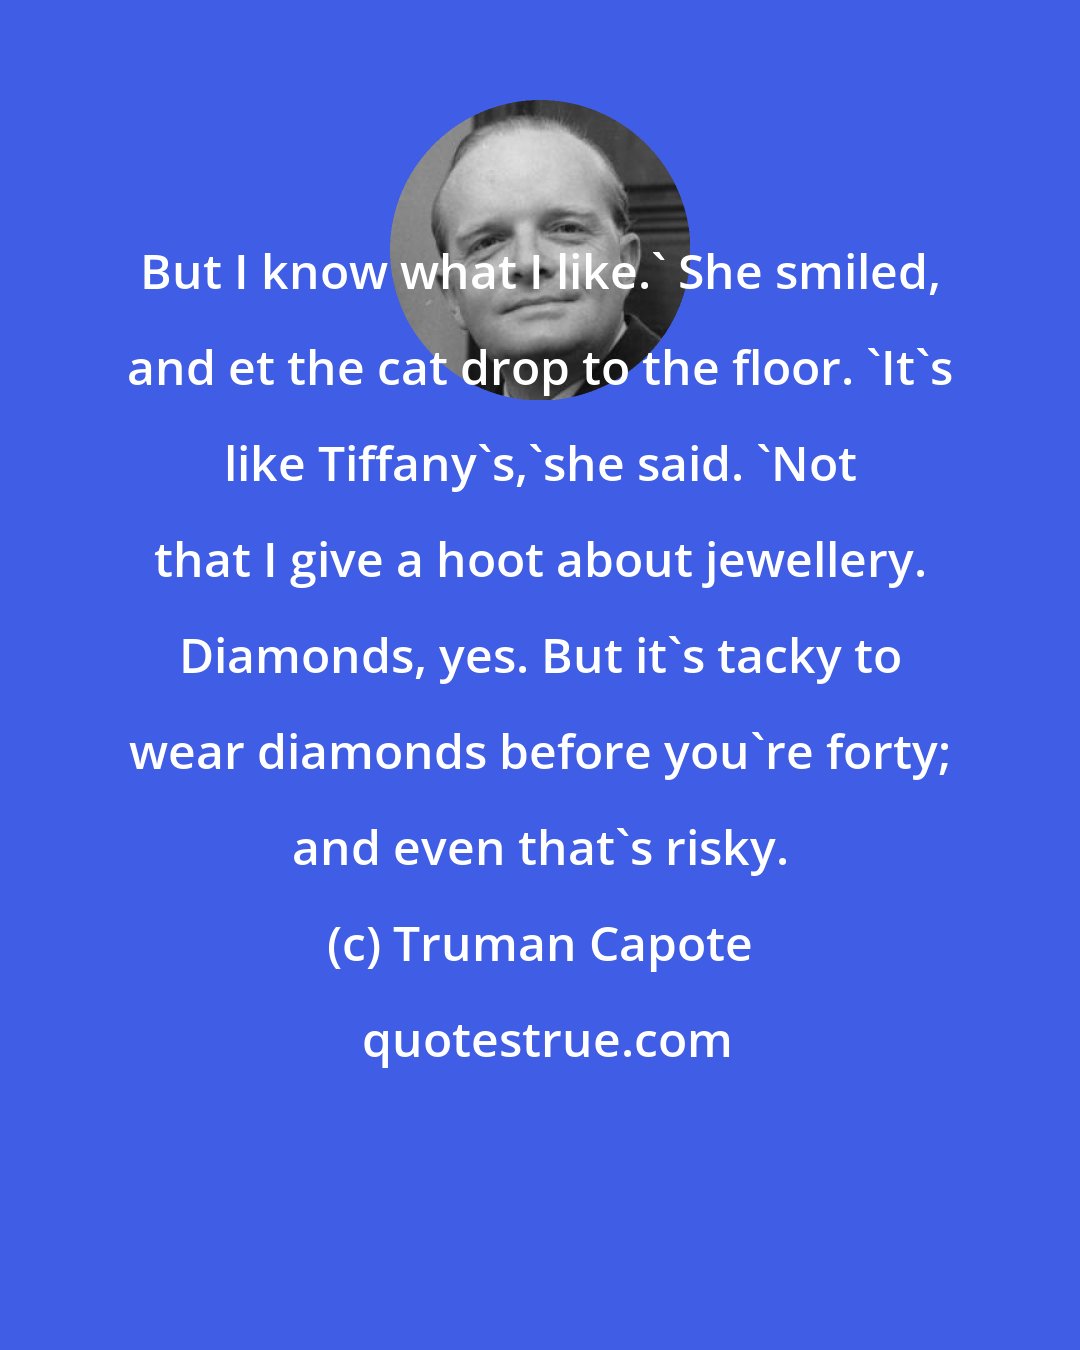 Truman Capote: But I know what I like.' She smiled, and et the cat drop to the floor. 'It's like Tiffany's,'she said. 'Not that I give a hoot about jewellery. Diamonds, yes. But it's tacky to wear diamonds before you're forty; and even that's risky.